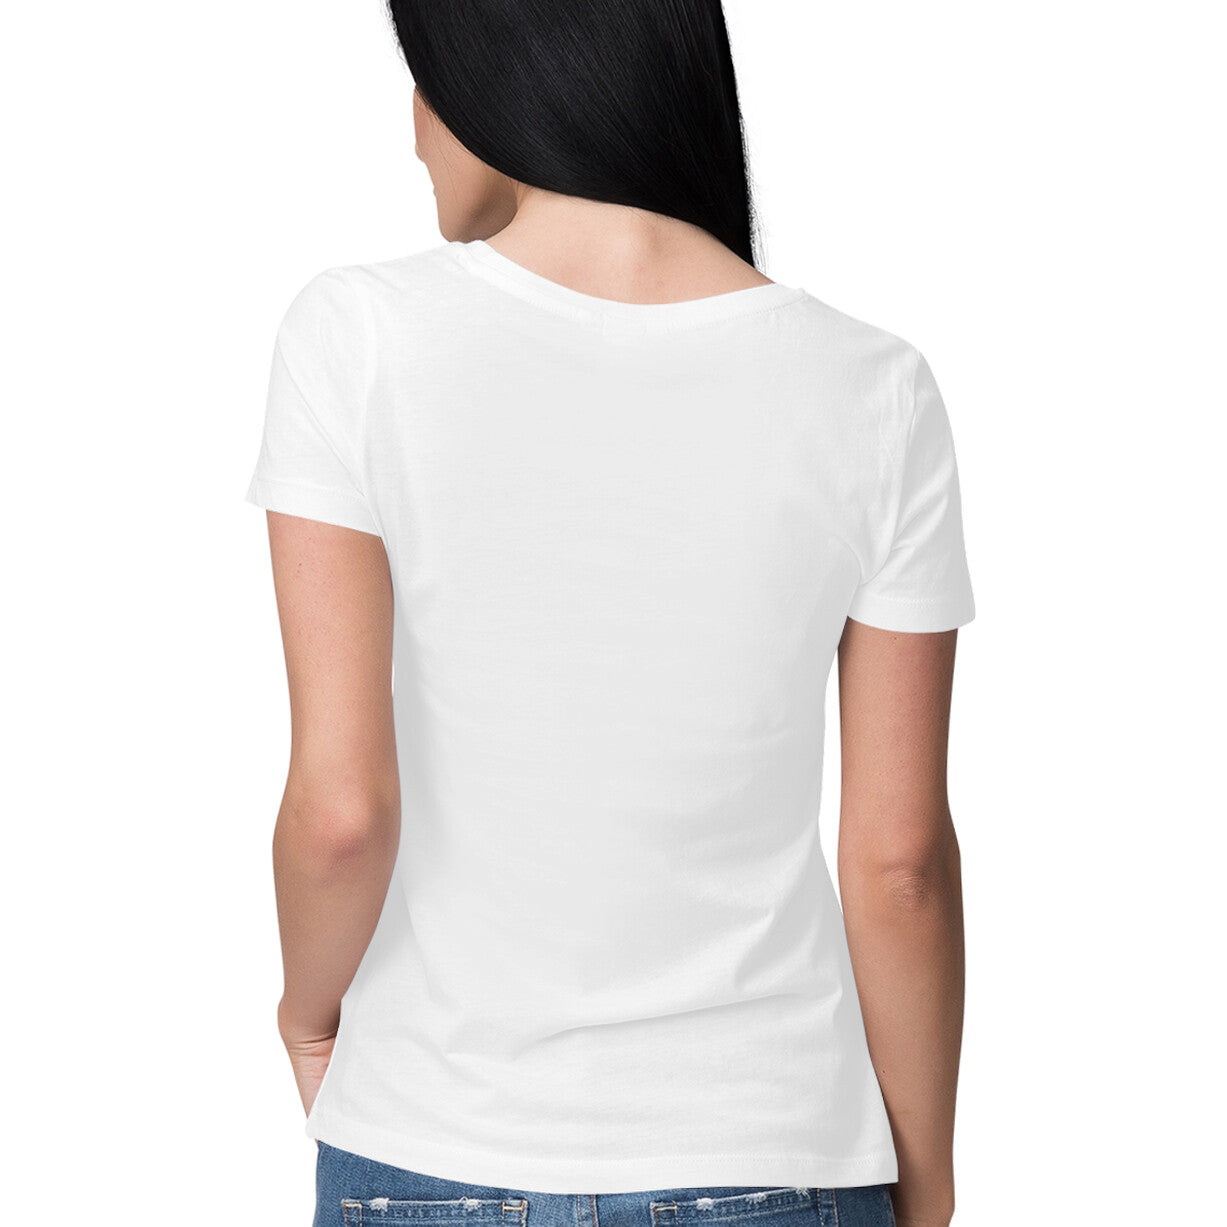 Women's Half Sleeve Round Neck T-Shirt - Our Love Story